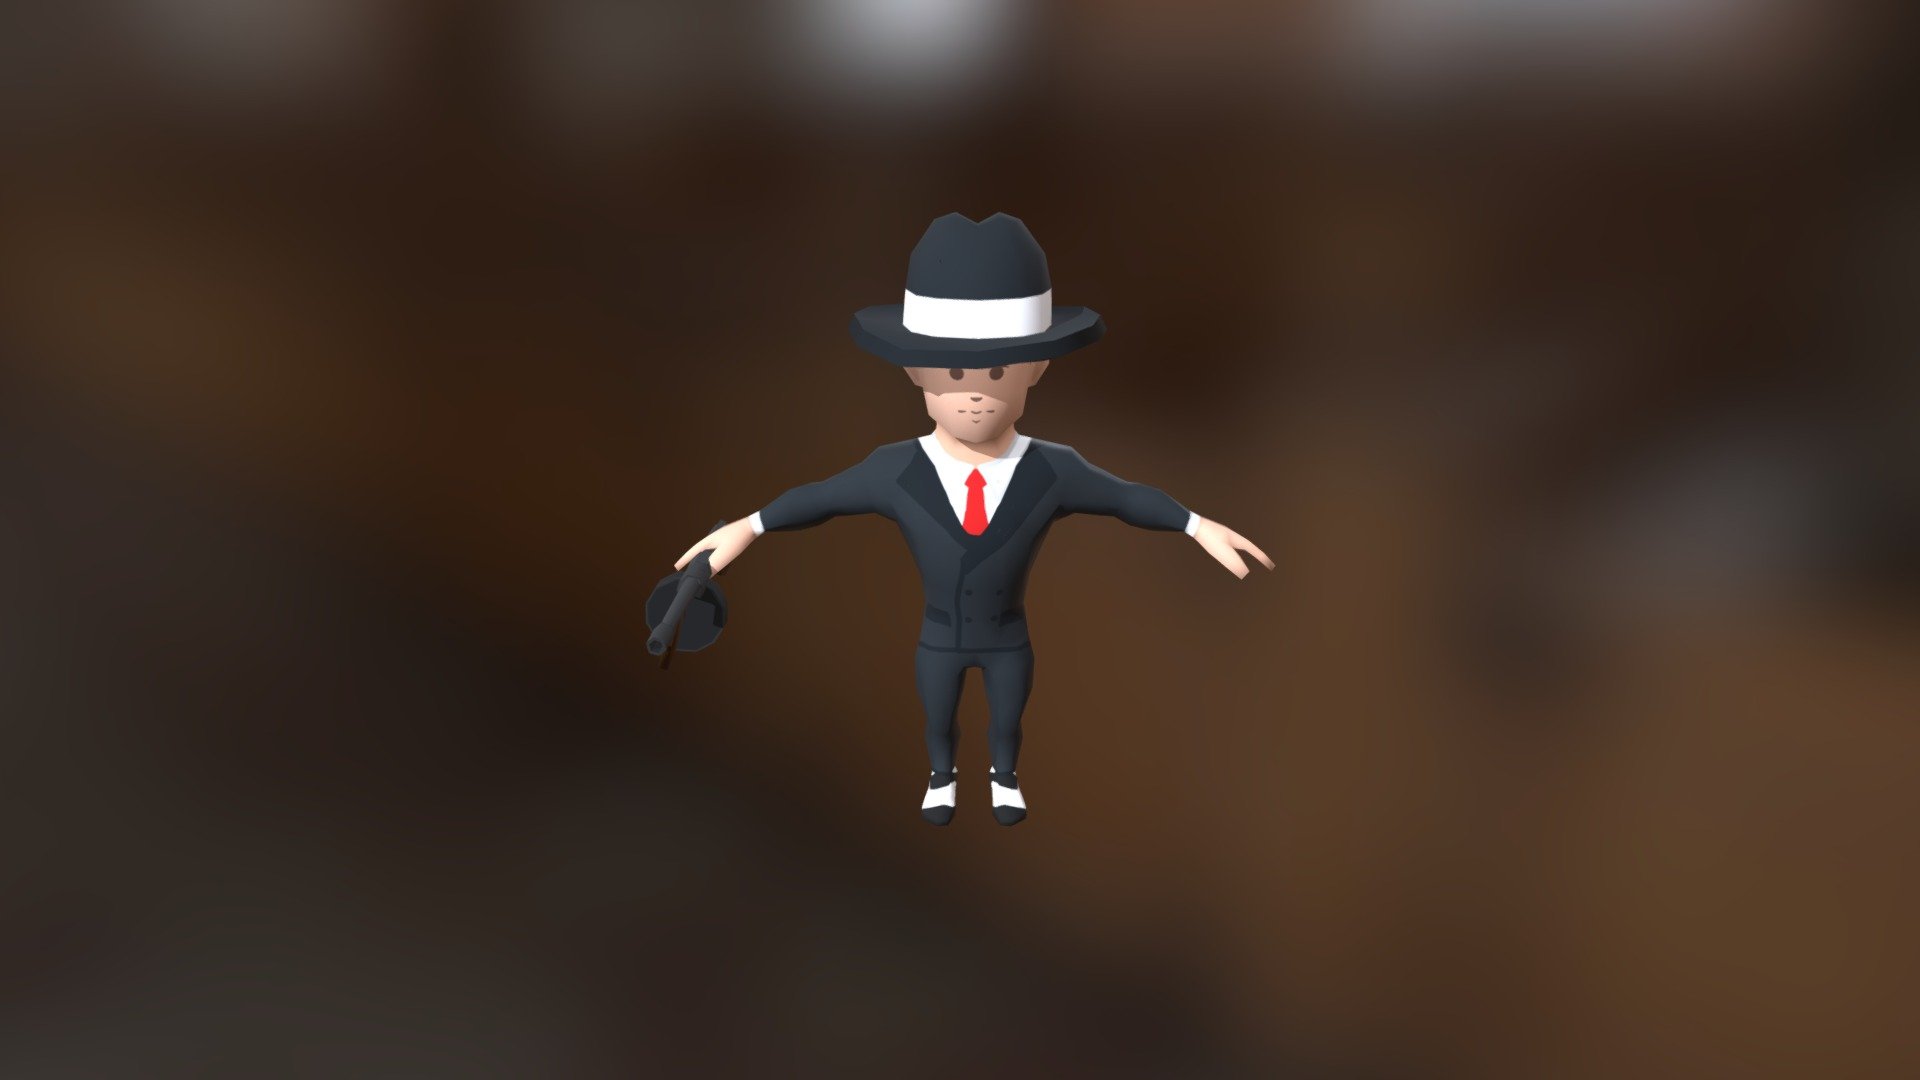 A rigged and skinned character model. Created in 3ds Max and game ready. 

The model is low-poly and ready for use in VR / AR and other real-time applications. 

The model is ready for animation or to be used in games and other projects. 

The model has been optimized, so it's good for mobile games, too. 
The character has a single texture and an easy-to-use custom rig.

It's possible to simply apply Mixamo animations to this model 3d model